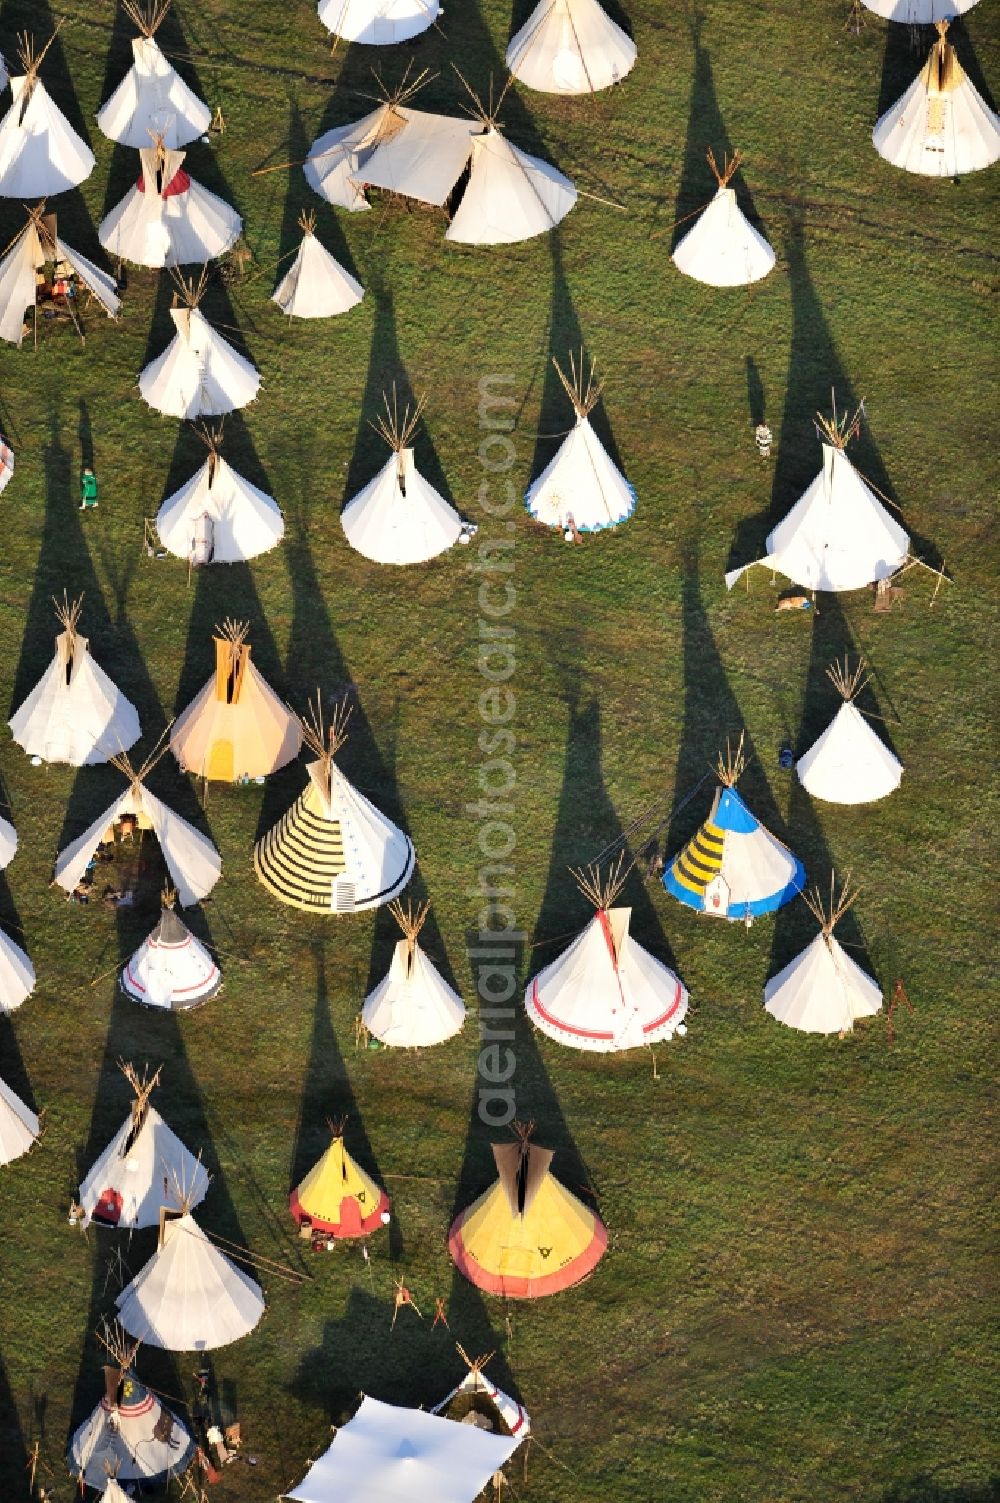 Aerial photograph Seddiner See - View of a tent camp in the district Kähnsdorf of the municipality Seddiner See in Brandenburg. The Indians meeting the Week found by the German Indianistikbund took place with about 1,000 Indians fans on a field. The participants ,who spent the nights in tipis, presented adjusted the lives of the Indians for ten days